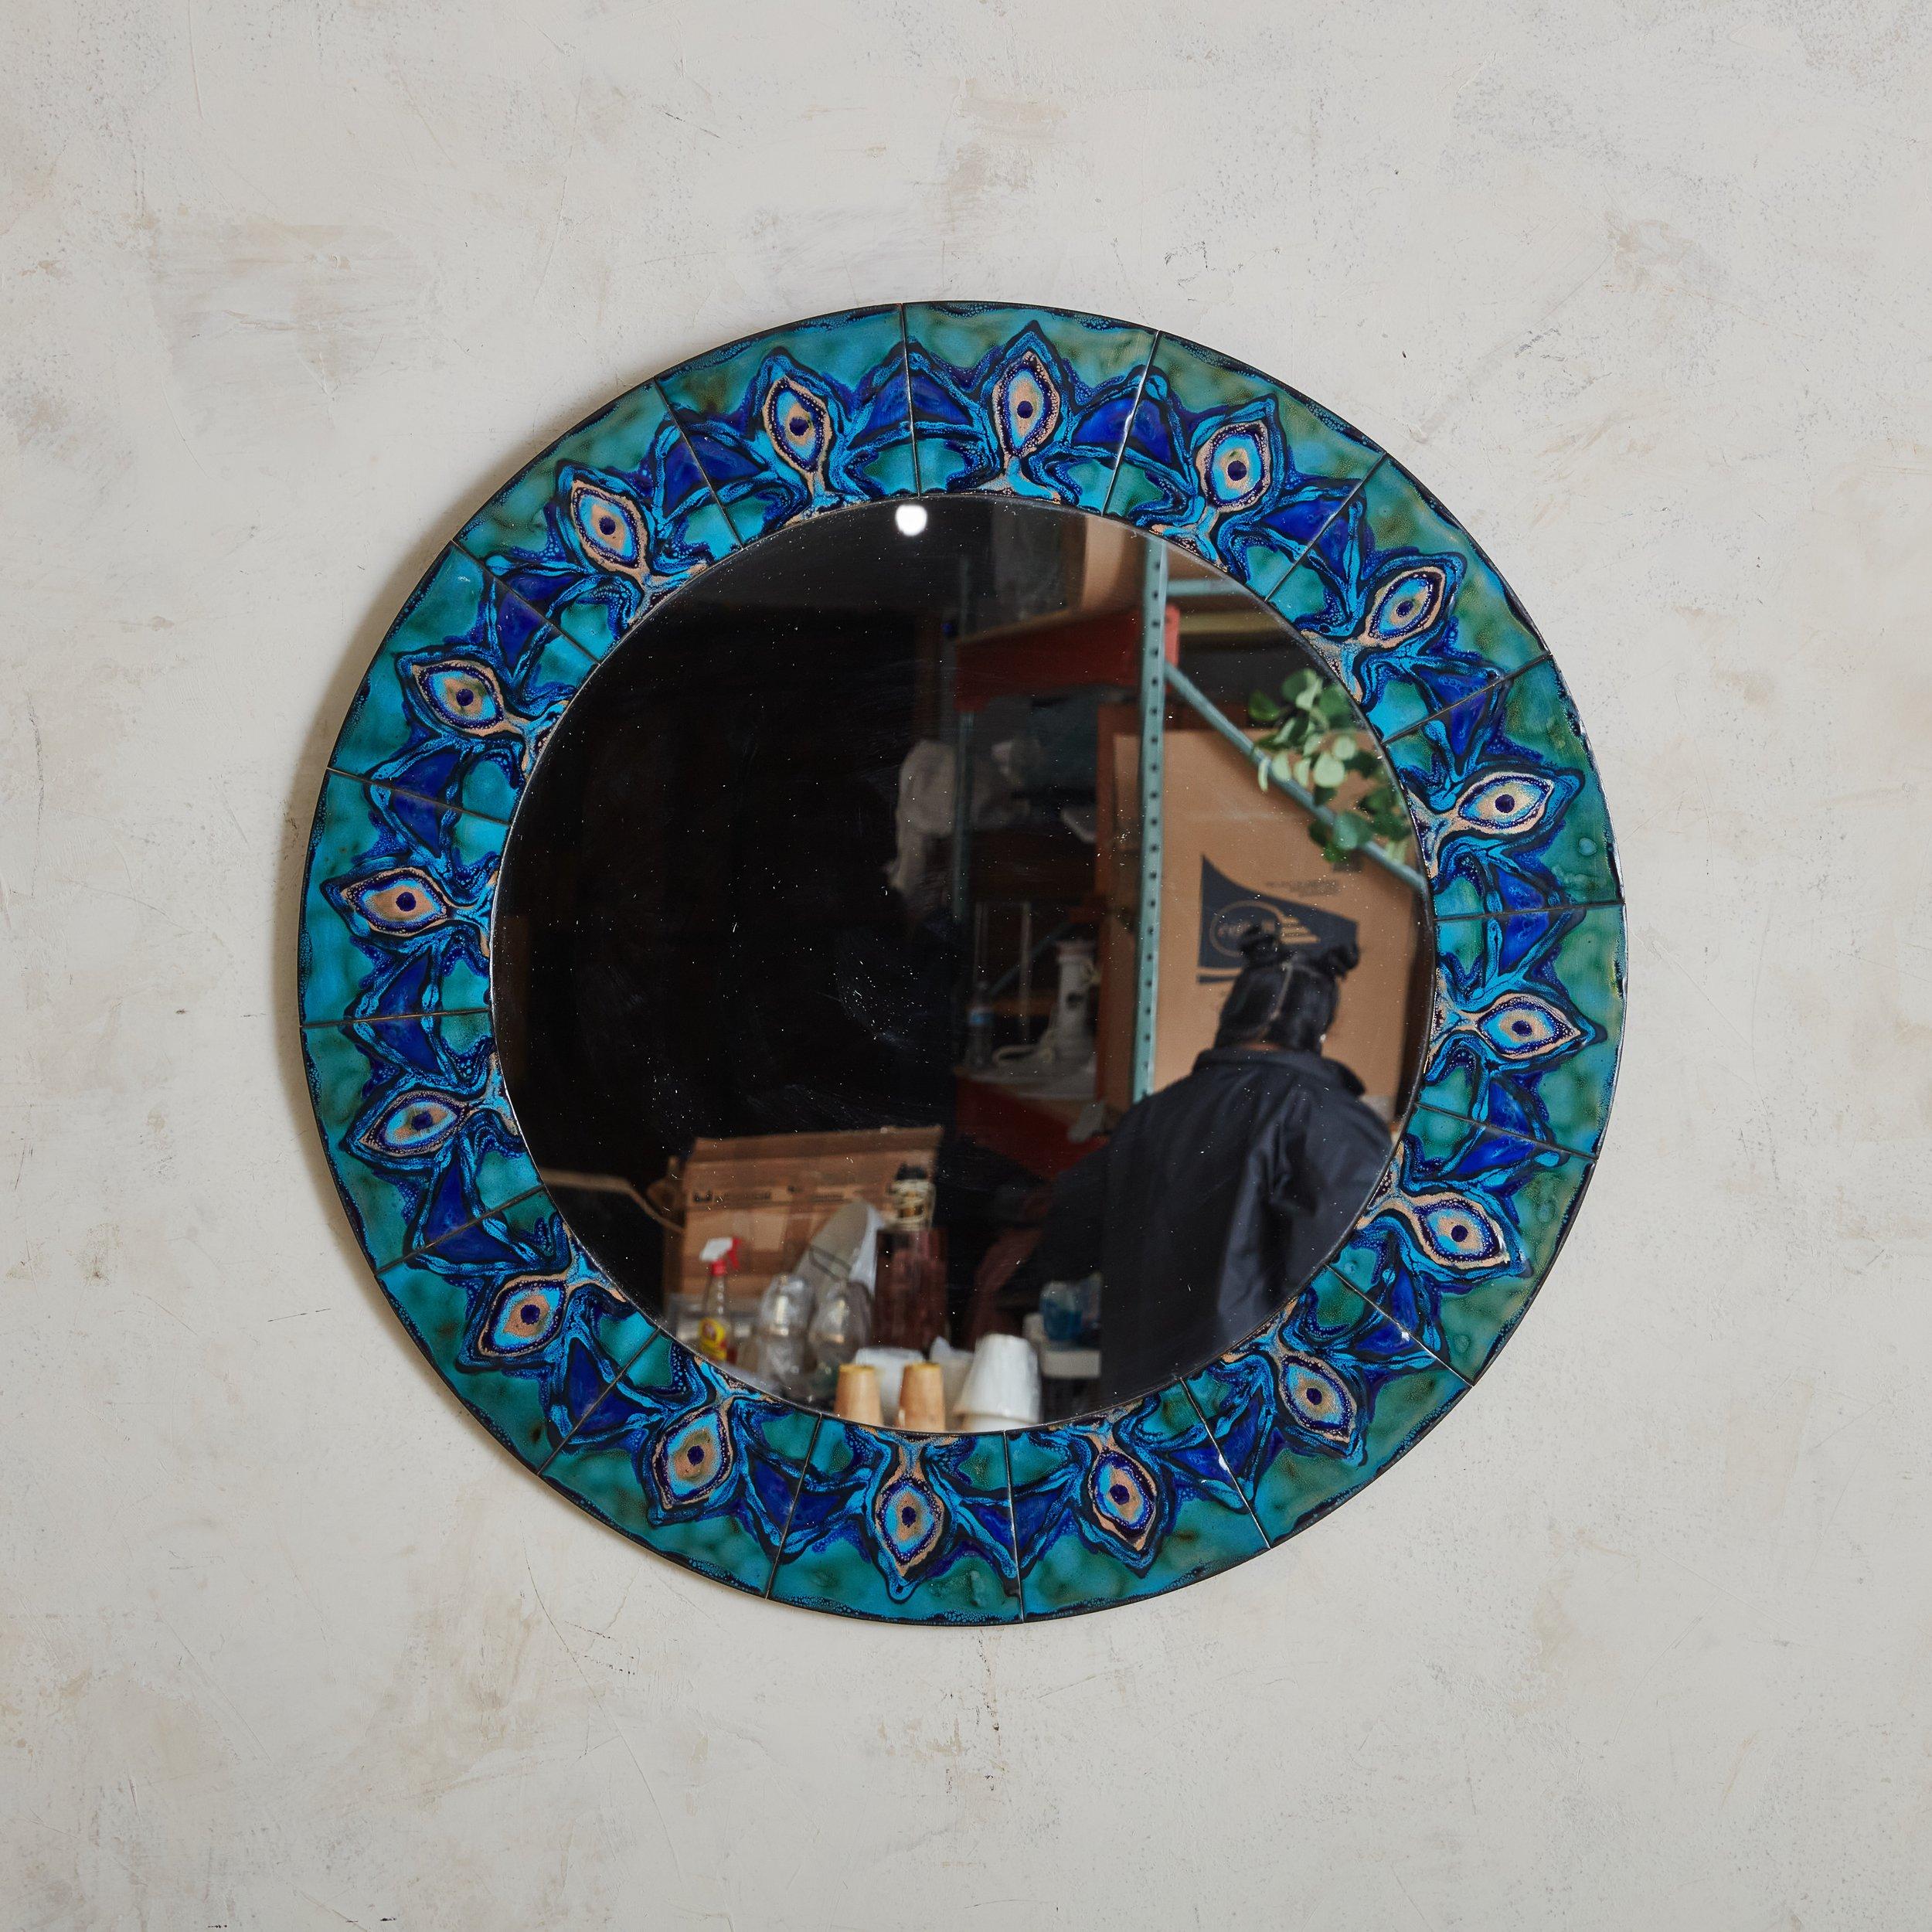 A Scandinavian Modern round wall mirror by Bodil Hagedorn Eje. Daughter of painter Thorvald Hagedorn-Olse, Bodil Eje was a Danish artist from the 20th Century who mostly worked with enamel. The mirror’s frame is composed of enameled copper plates